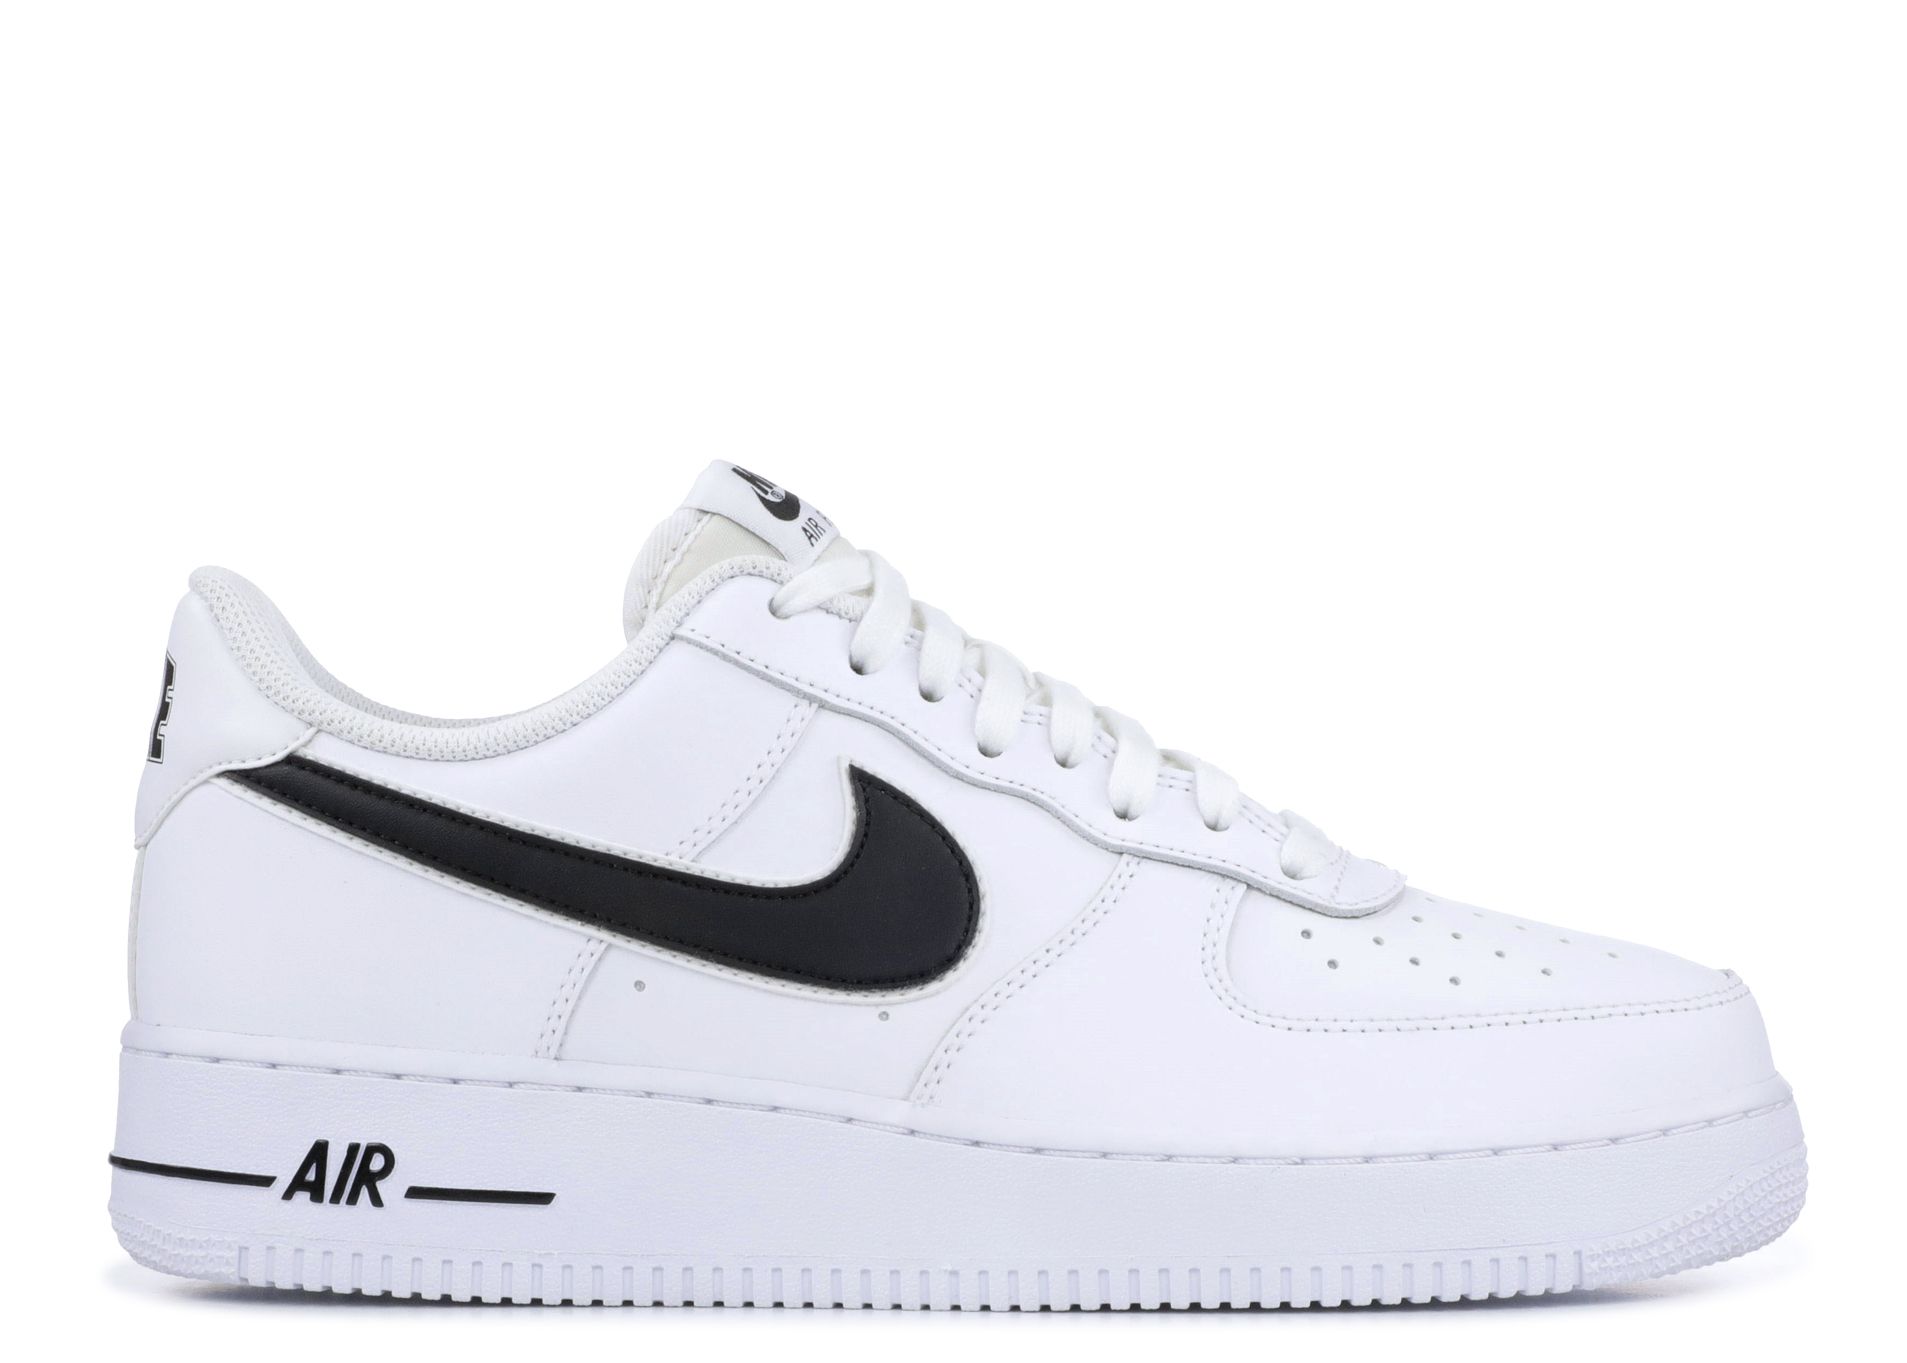 Кроссовки Nike Air Force 1 Low '07 3 'White Black', белый air force 1 07 low since 1982